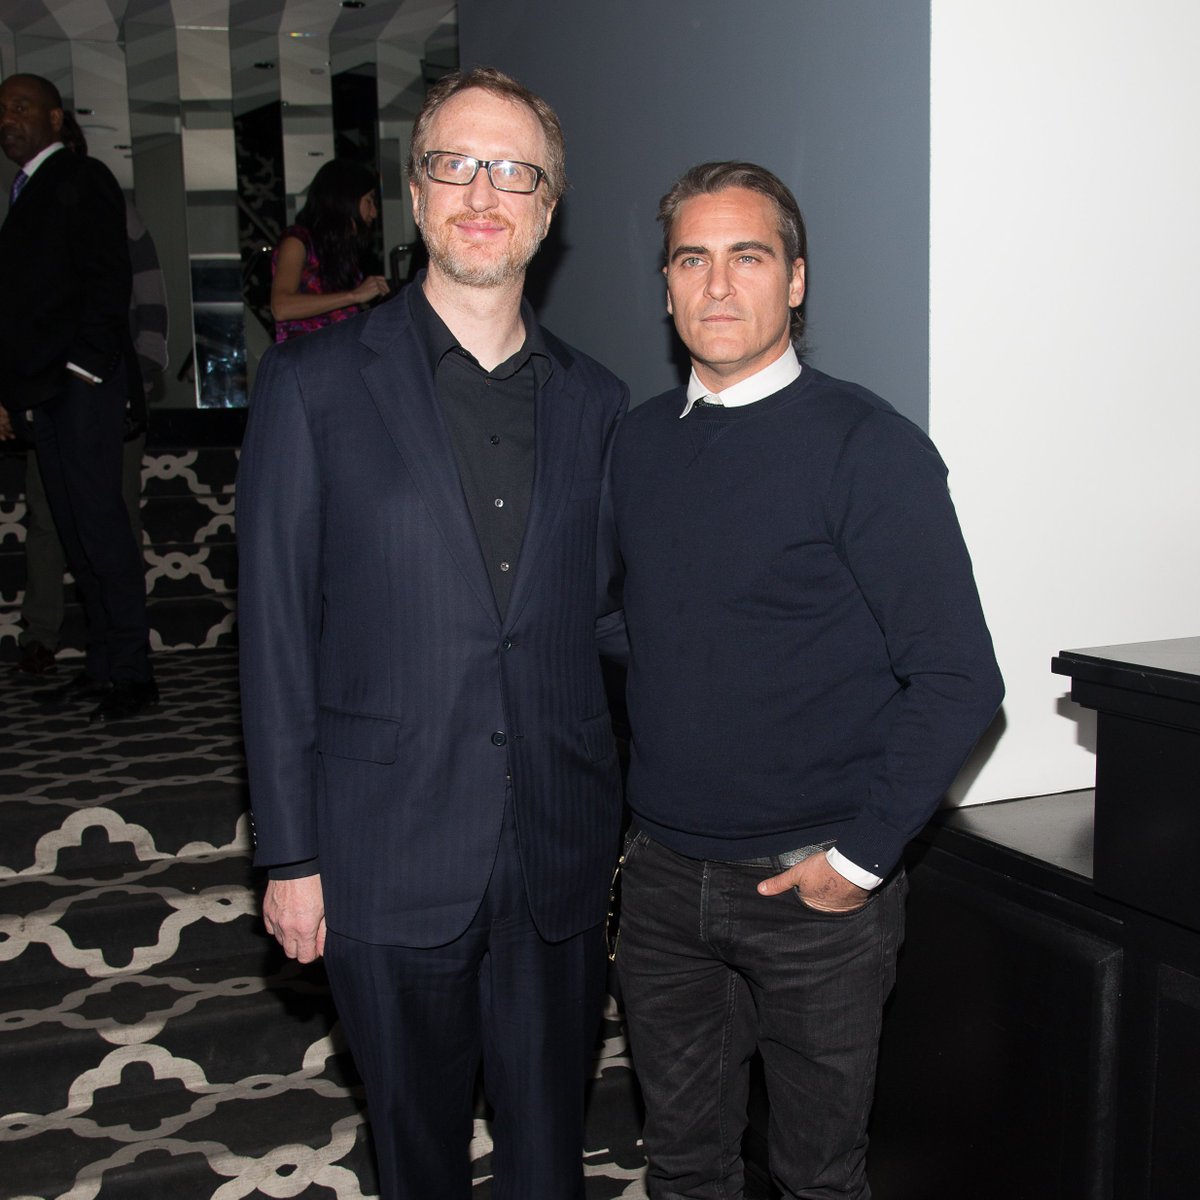 “Why is Joaquin Phoenix ‘difficult’? He’s not difficult. He’s great. He’s ‘difficult’ in the best way. You want that difficult,” James Gray said of defending Phoenix. “Difficult for me is you don’t show up on time.' bit.ly/3Nx1e30